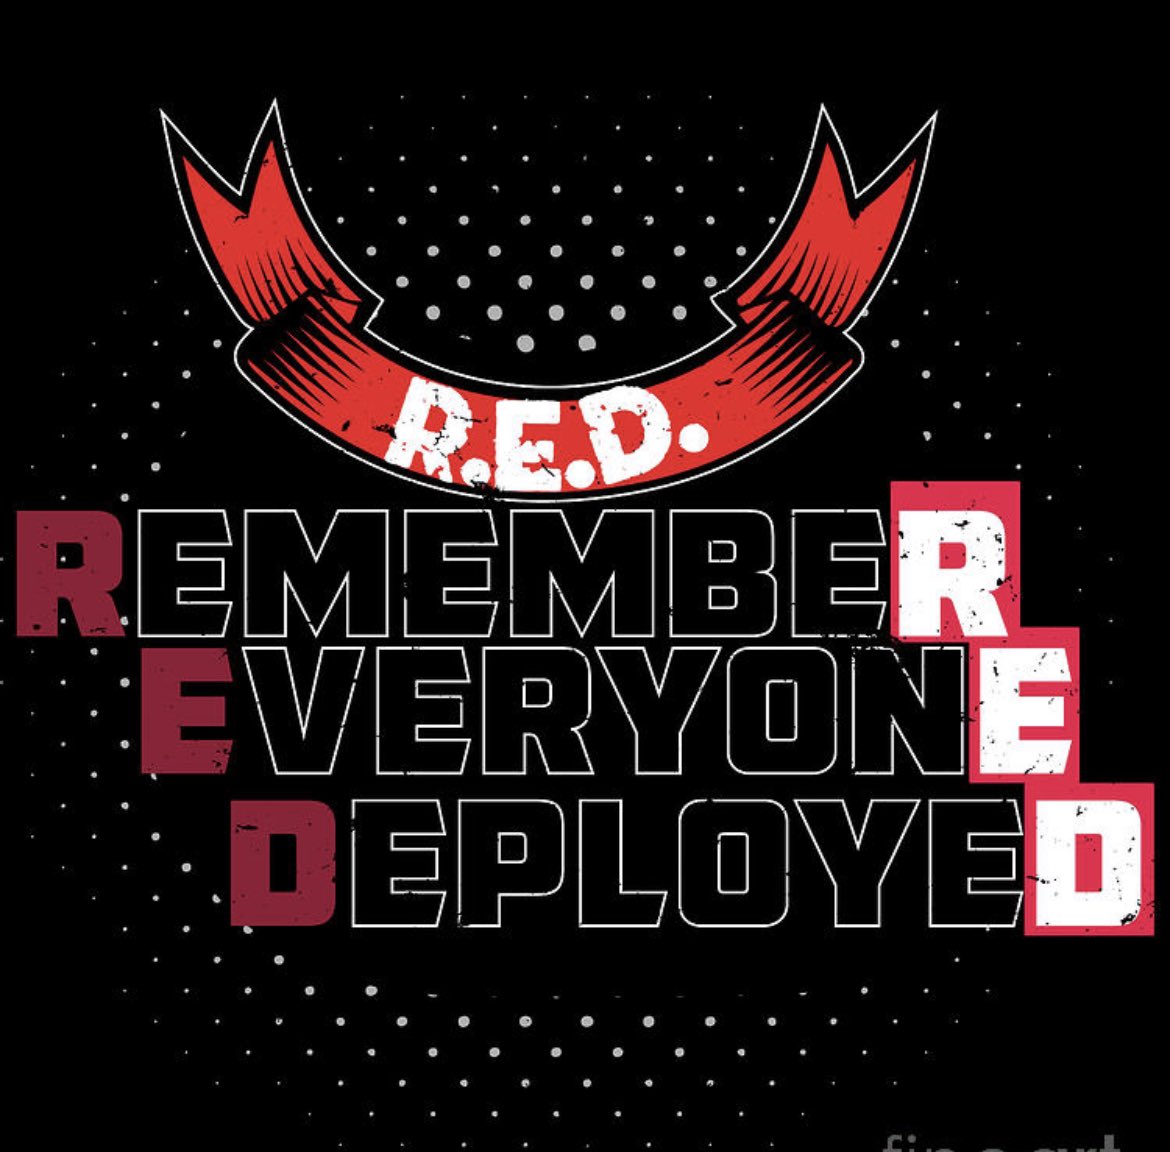 🔴R.E.D. Friday Veterans🔴 Remembering our Brothers & Sisters Deployed 5 @mgtexp @mike19543 @mikeyg29575 @mil_vet17 @Ministerofblog1 @MoroniusE @MRedPilld @NavyVeteranMark @NormanS55464475 @opend5 @phoenixfyre2020 @pop6627 @quadsfather